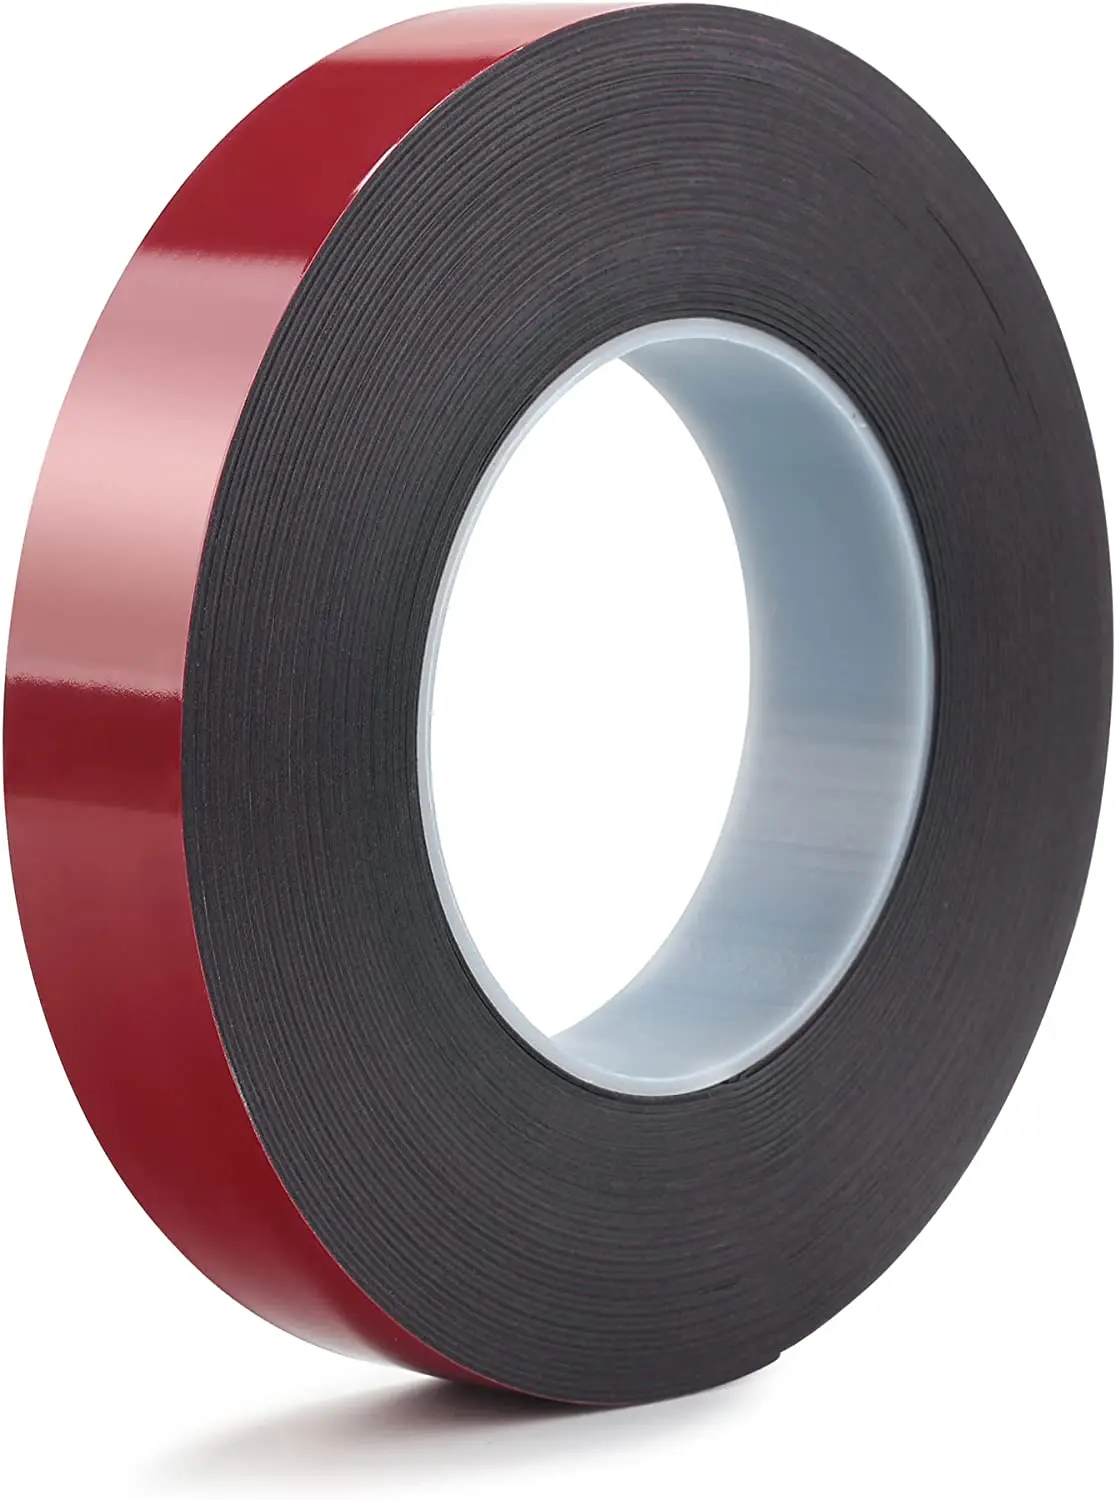 

10M Double sided tape Black strong mounting tape multiple sizes no residual waterproof outdoor indoor adhesive